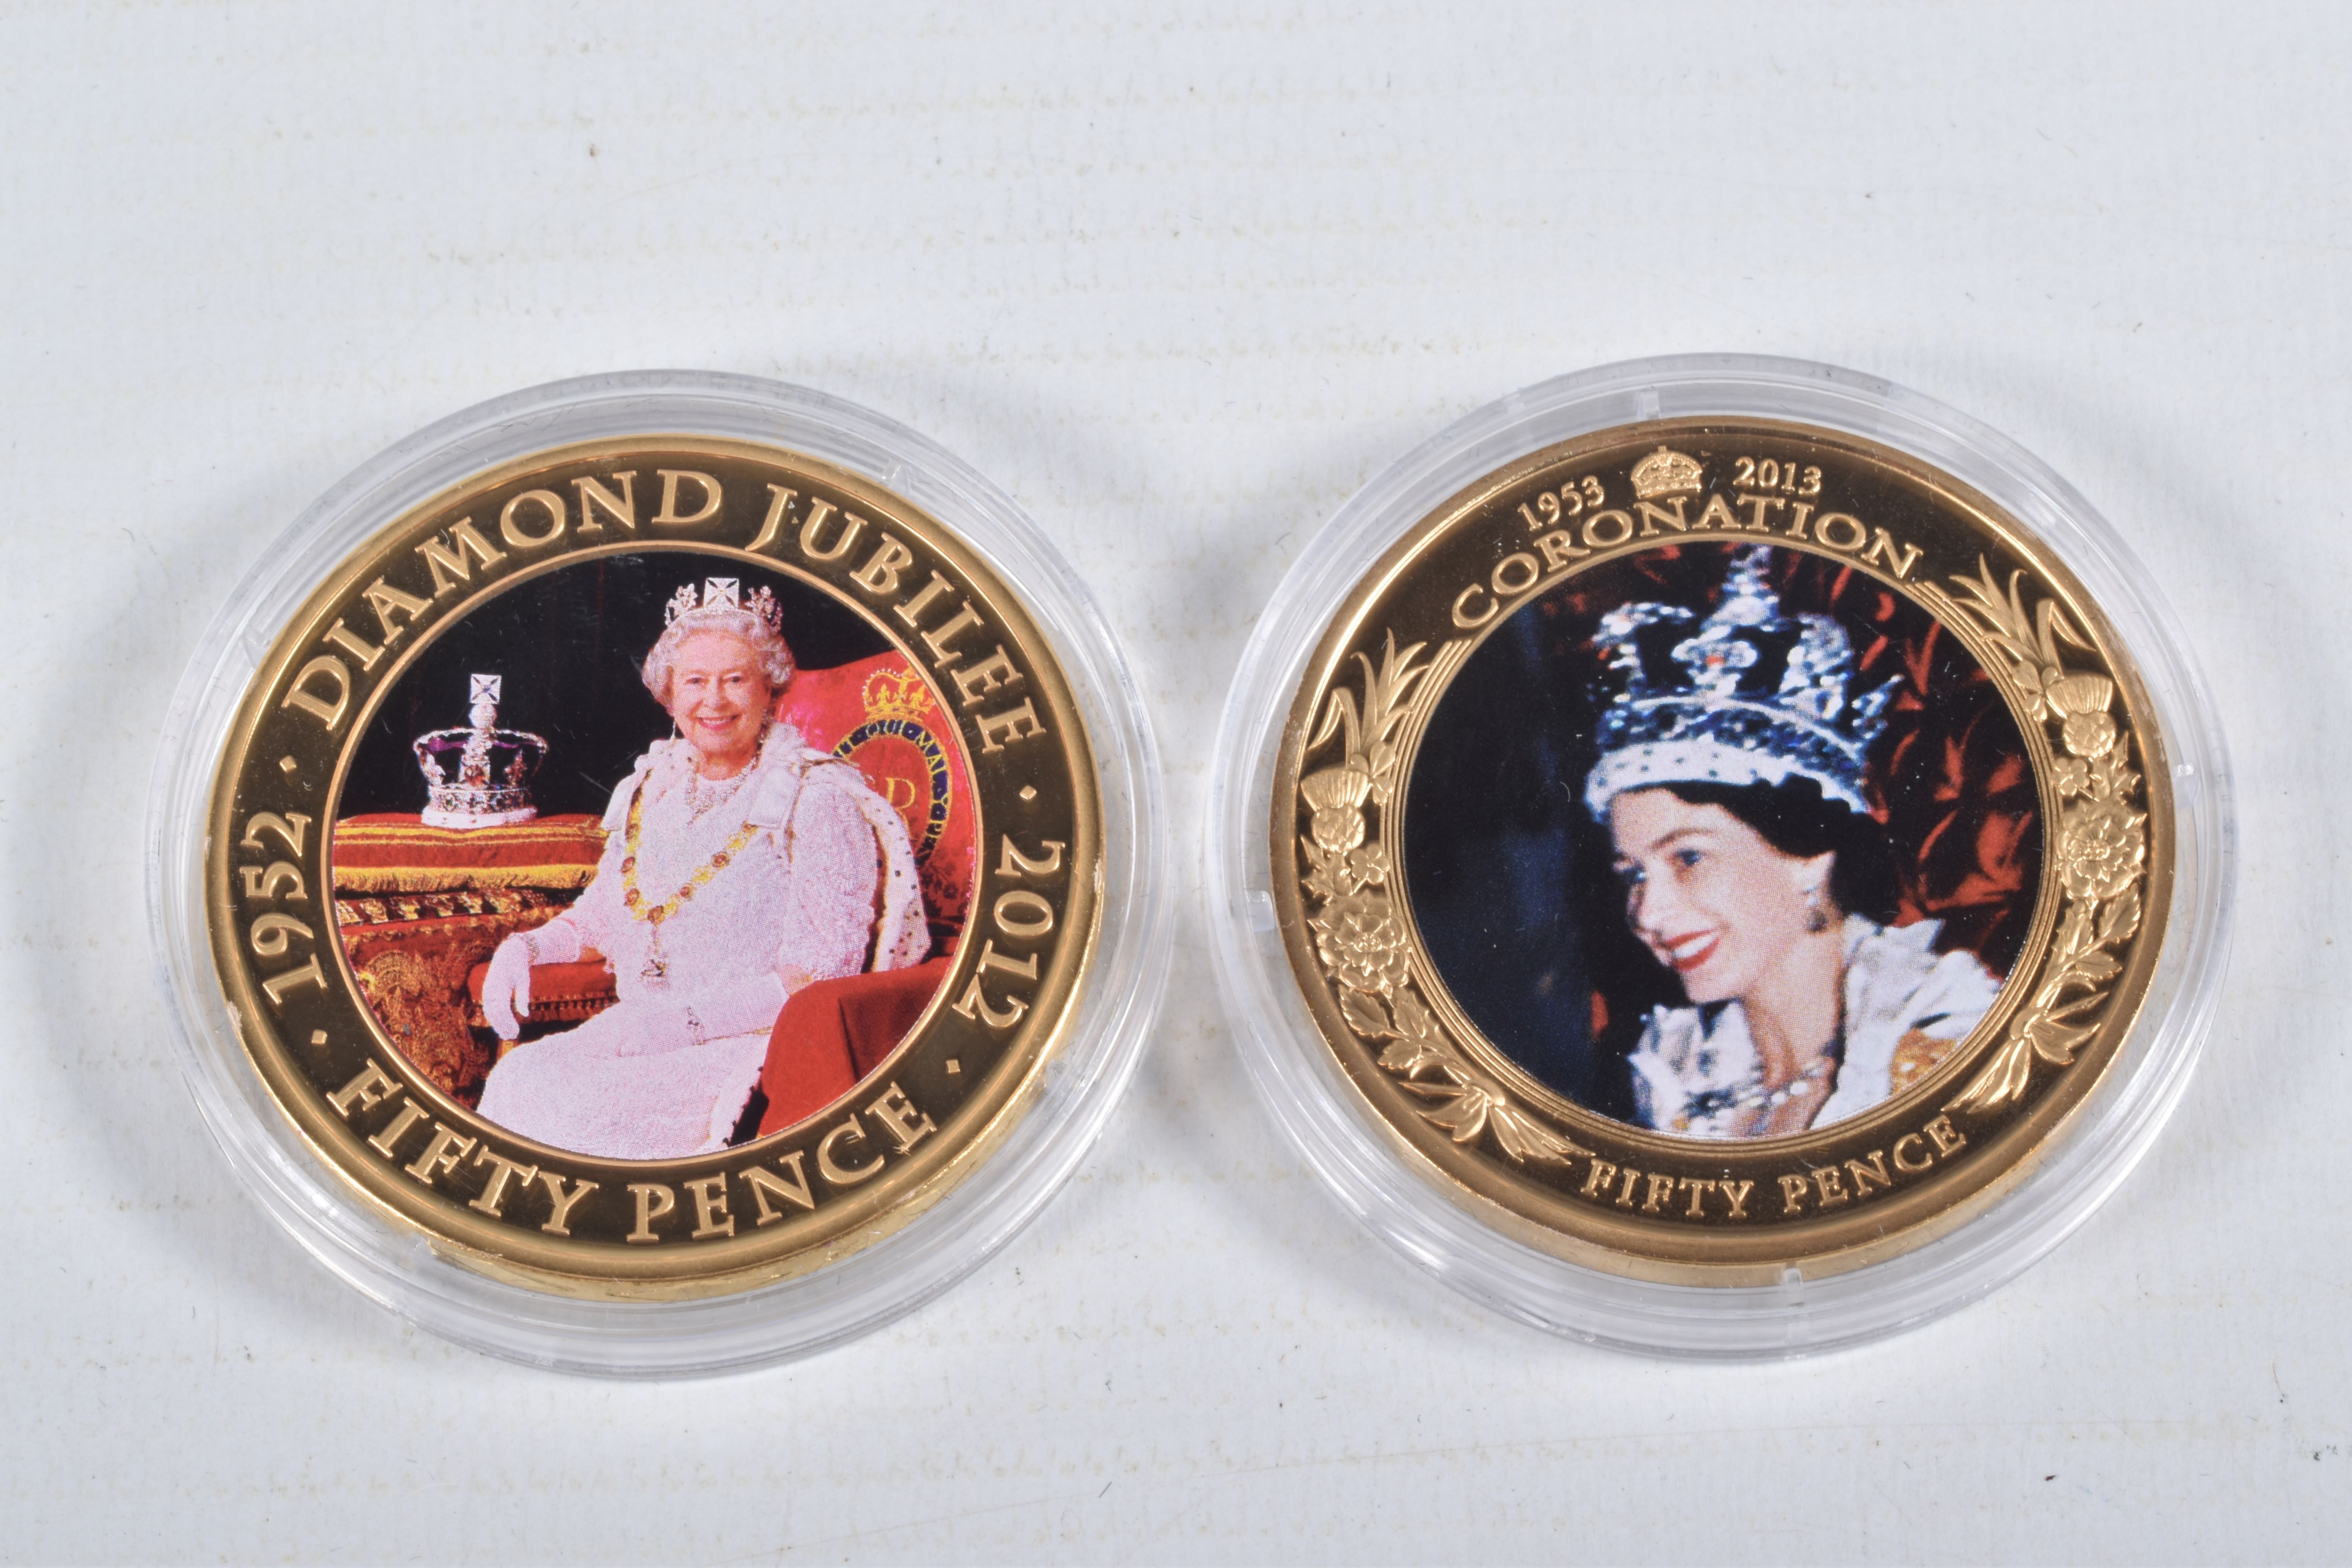 A PACKET CONTAINING SIX QUEEN ELIZABETH II 2011-13 GOLD LAYERED AND PICTORIAL COINS, Jersey, - Image 6 of 7